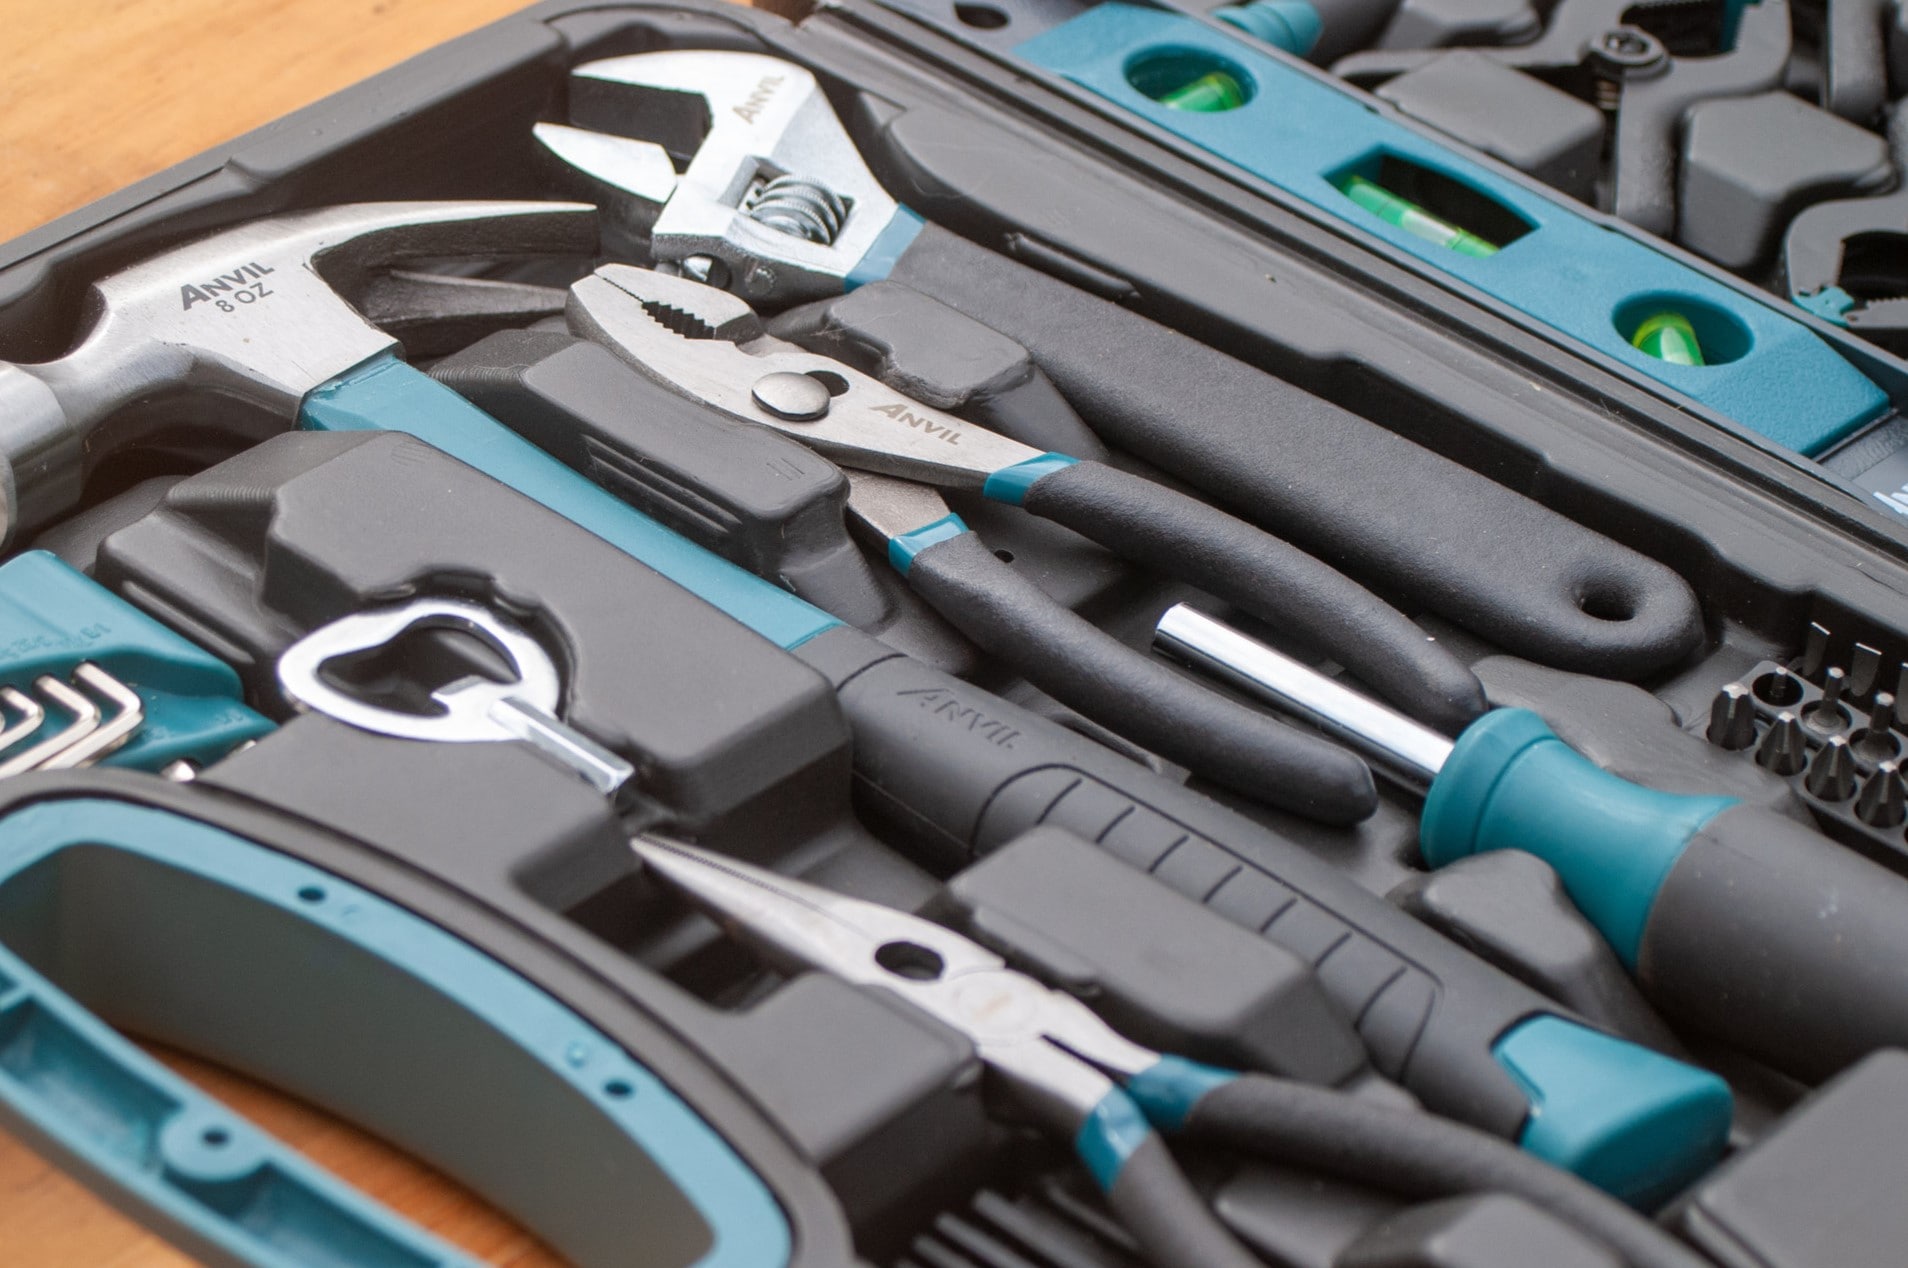 How To Organize Home Repair Tools